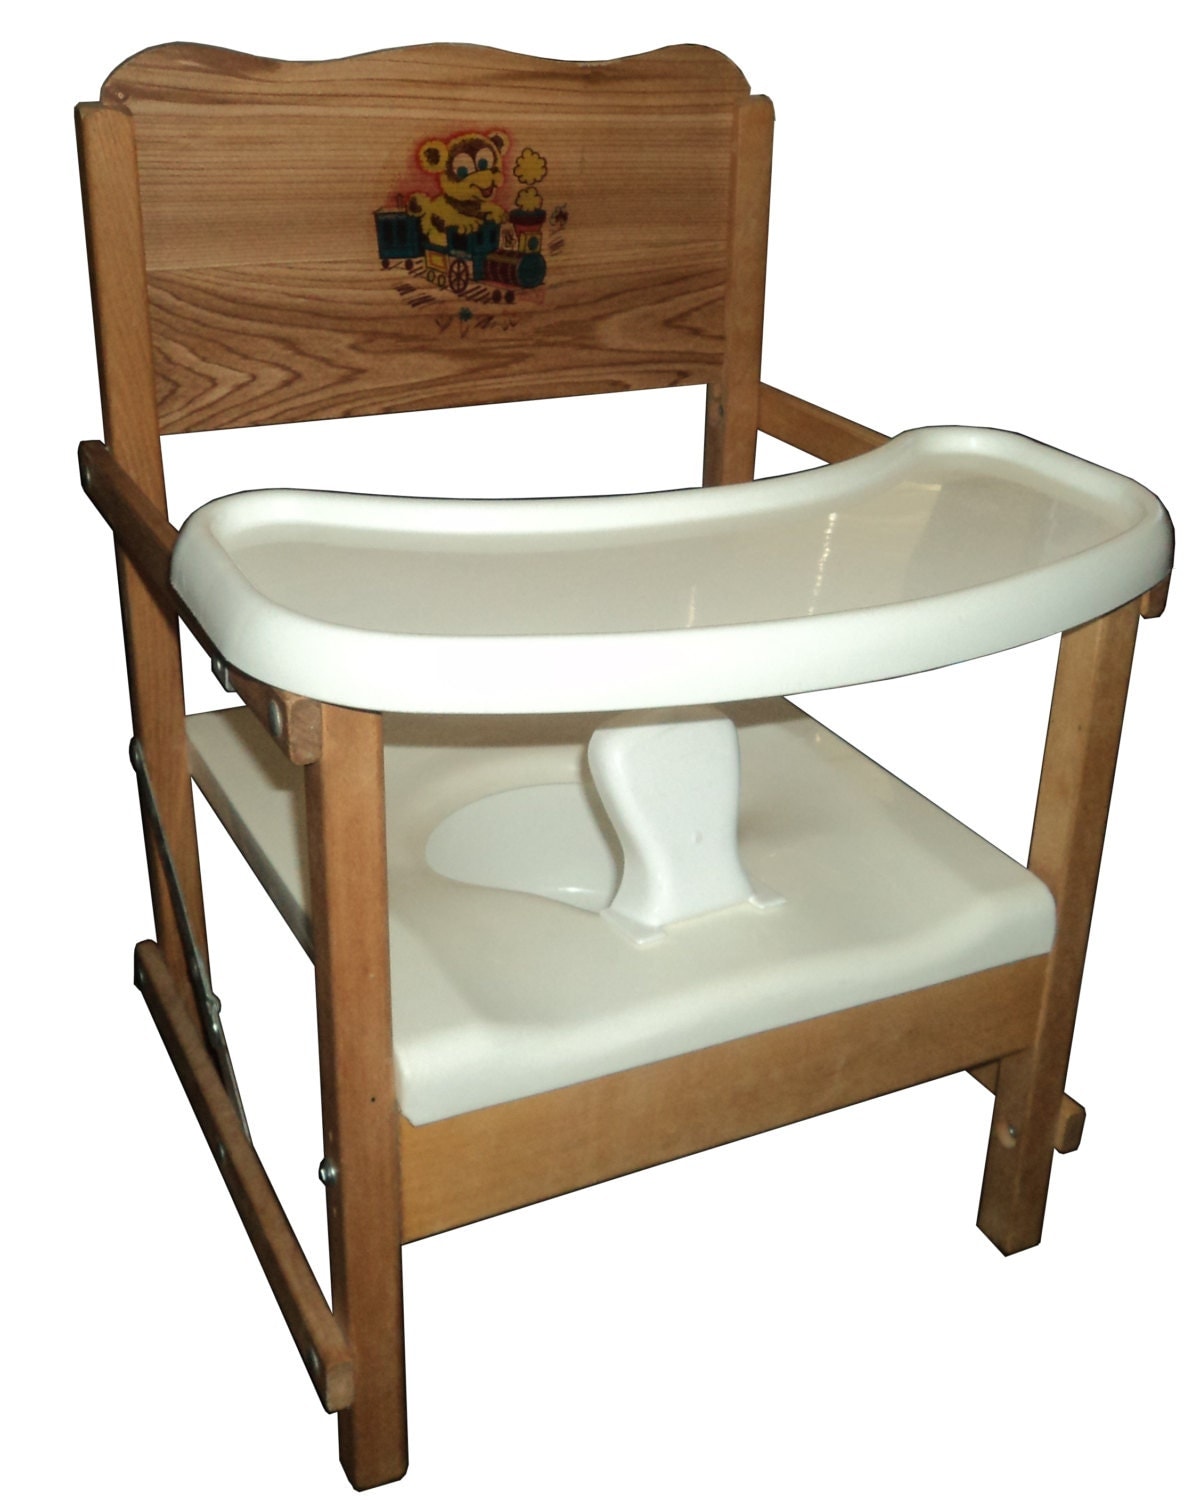 Wooden potty chair with tray old fashioned by 1950sPottyChairs